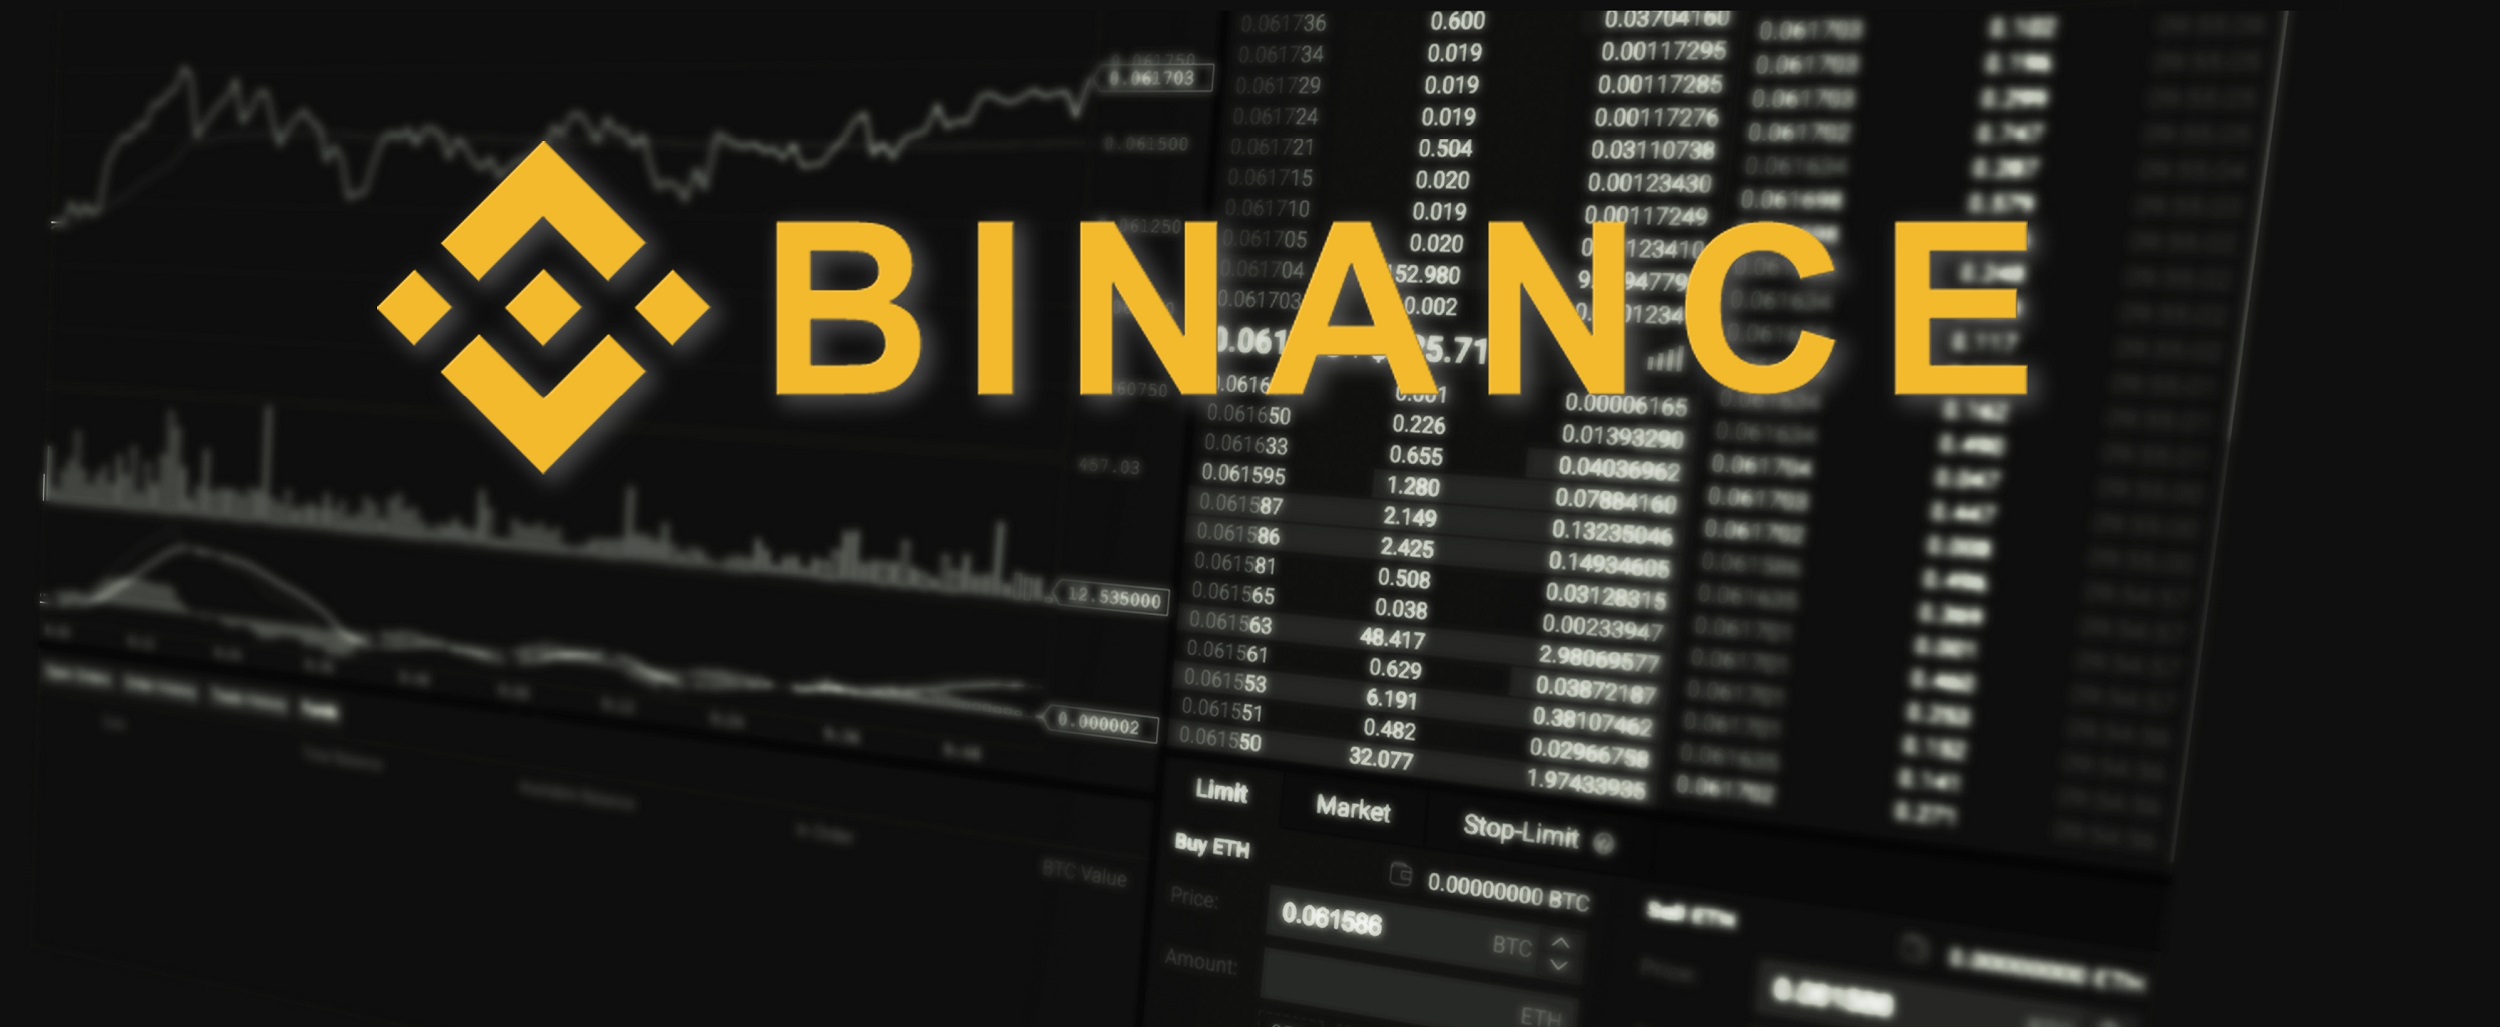 Binance Coin Price Moves up Again as CoinFlip ATM Integration is Being Tested